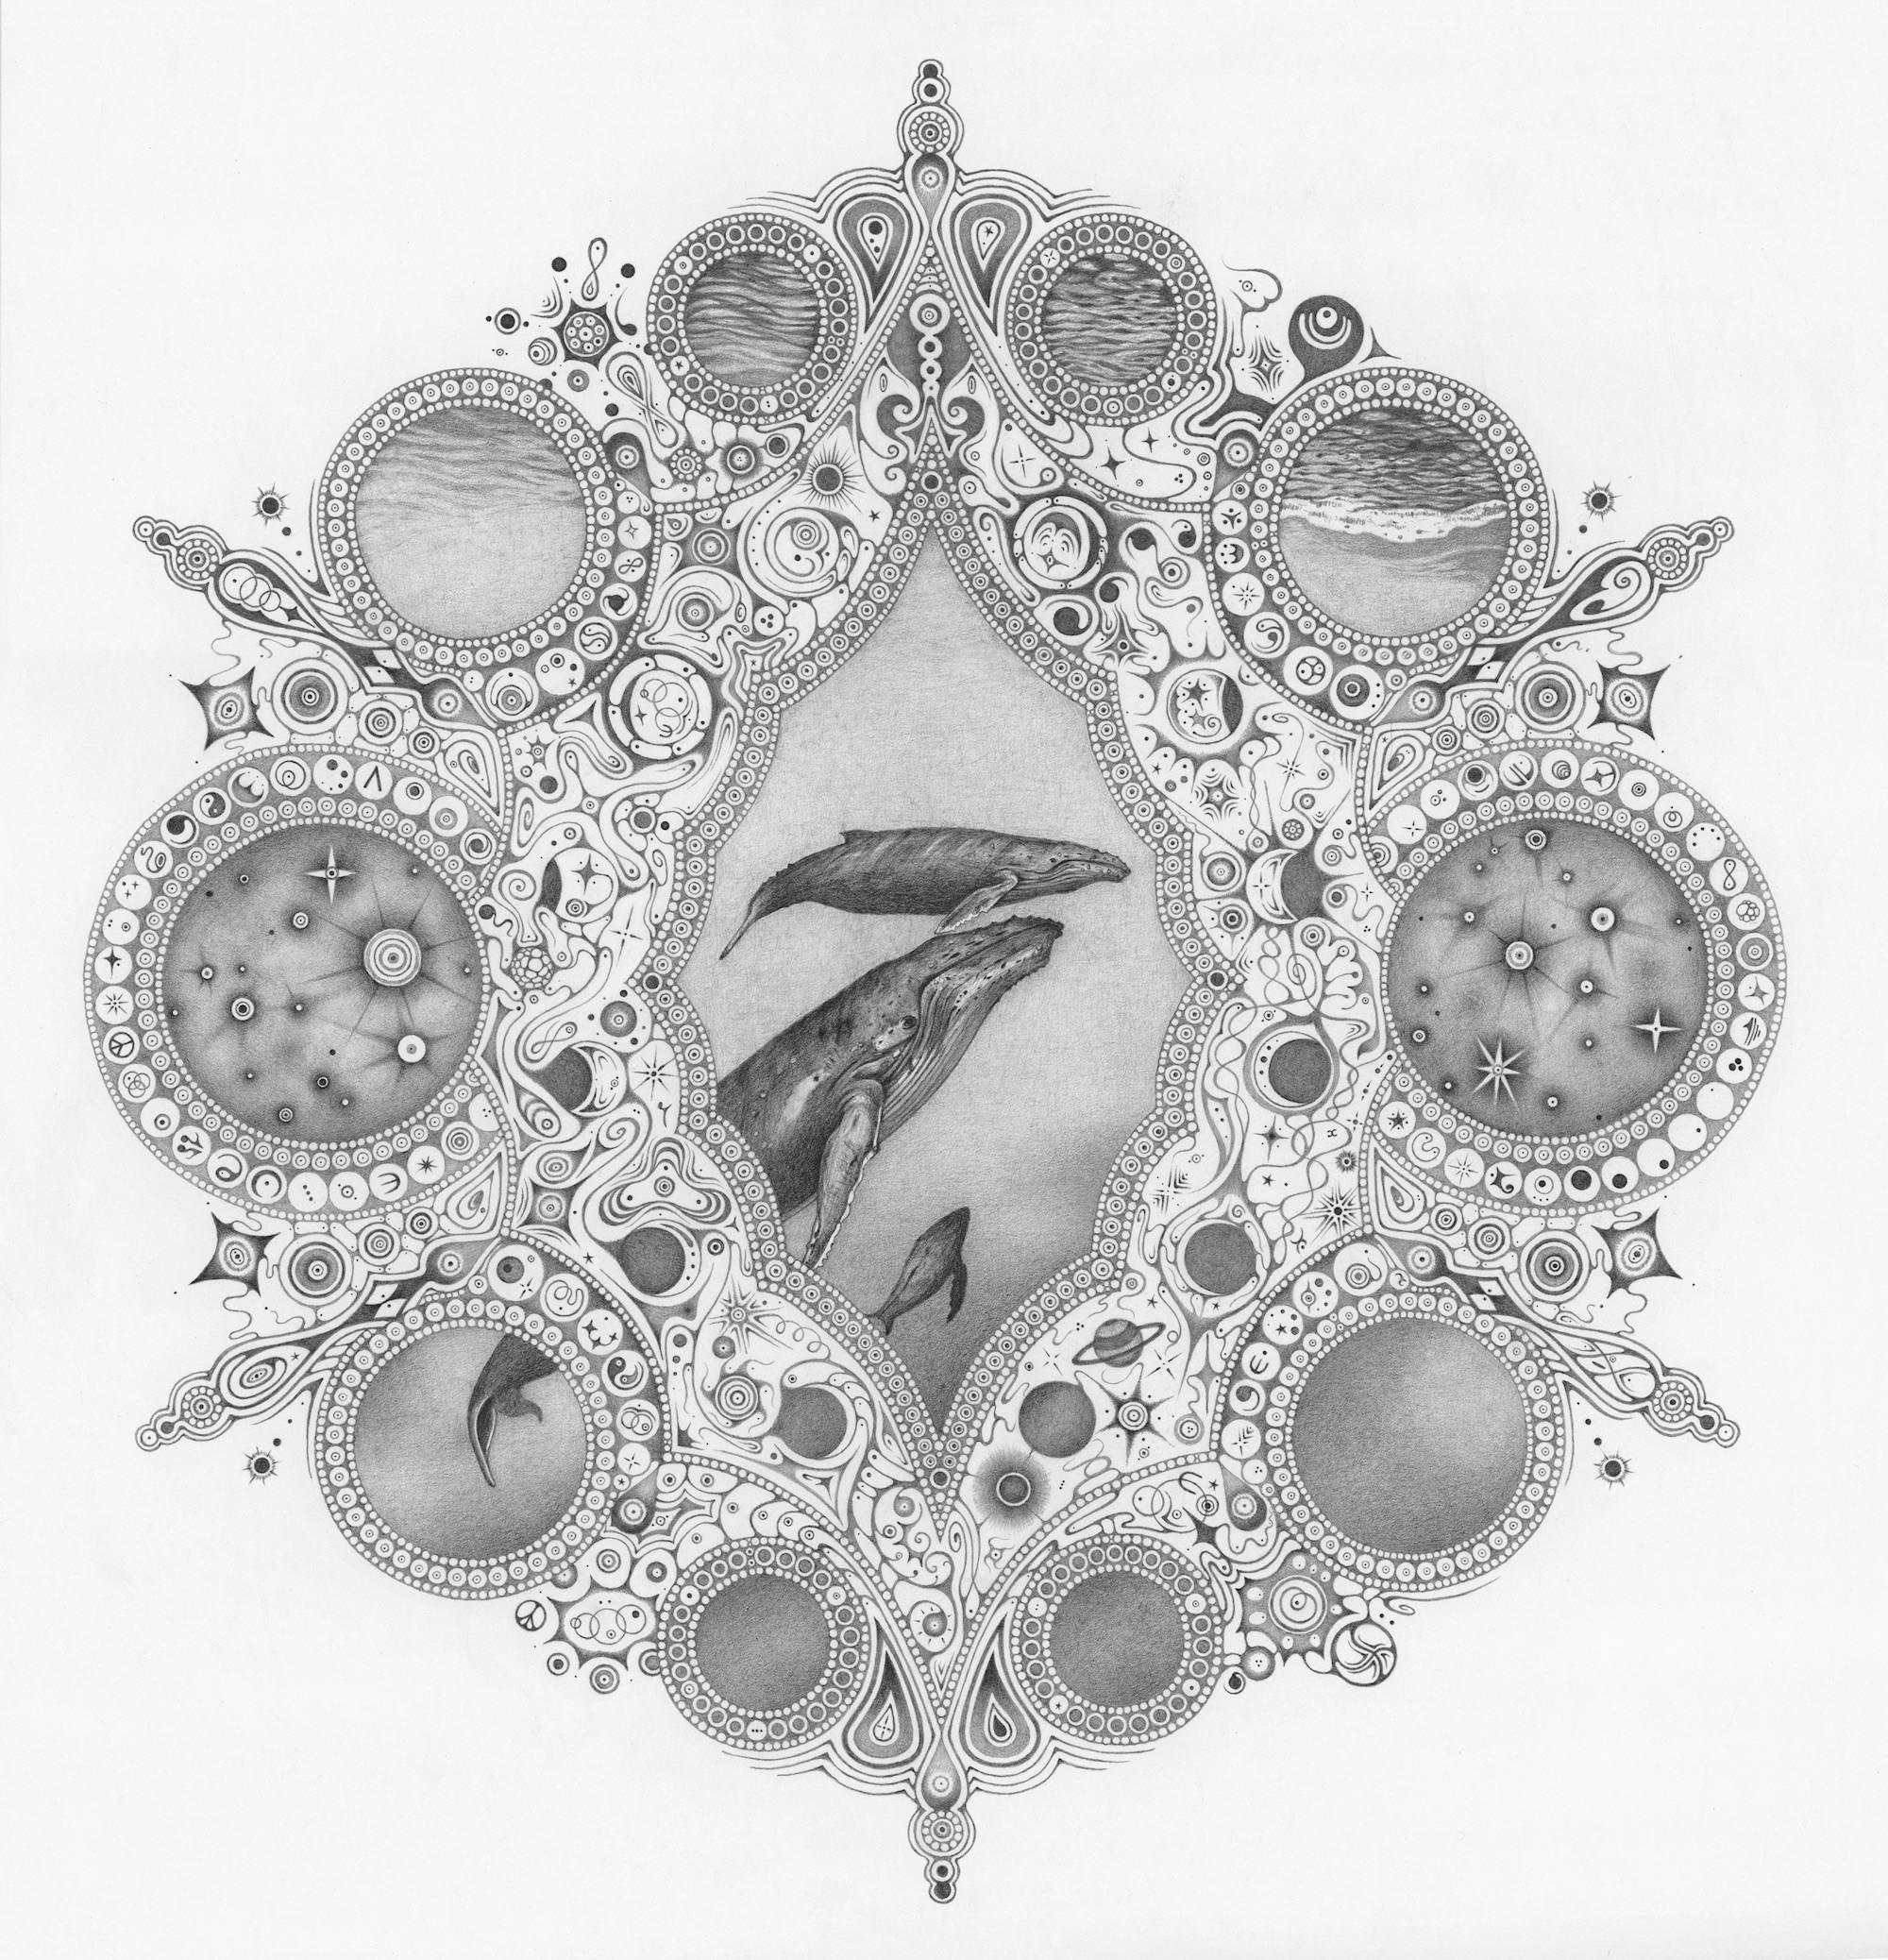 Snowflakes 148 Mother, Whales, Seascape, Planets, Ocean Mandala Pencil Drawing